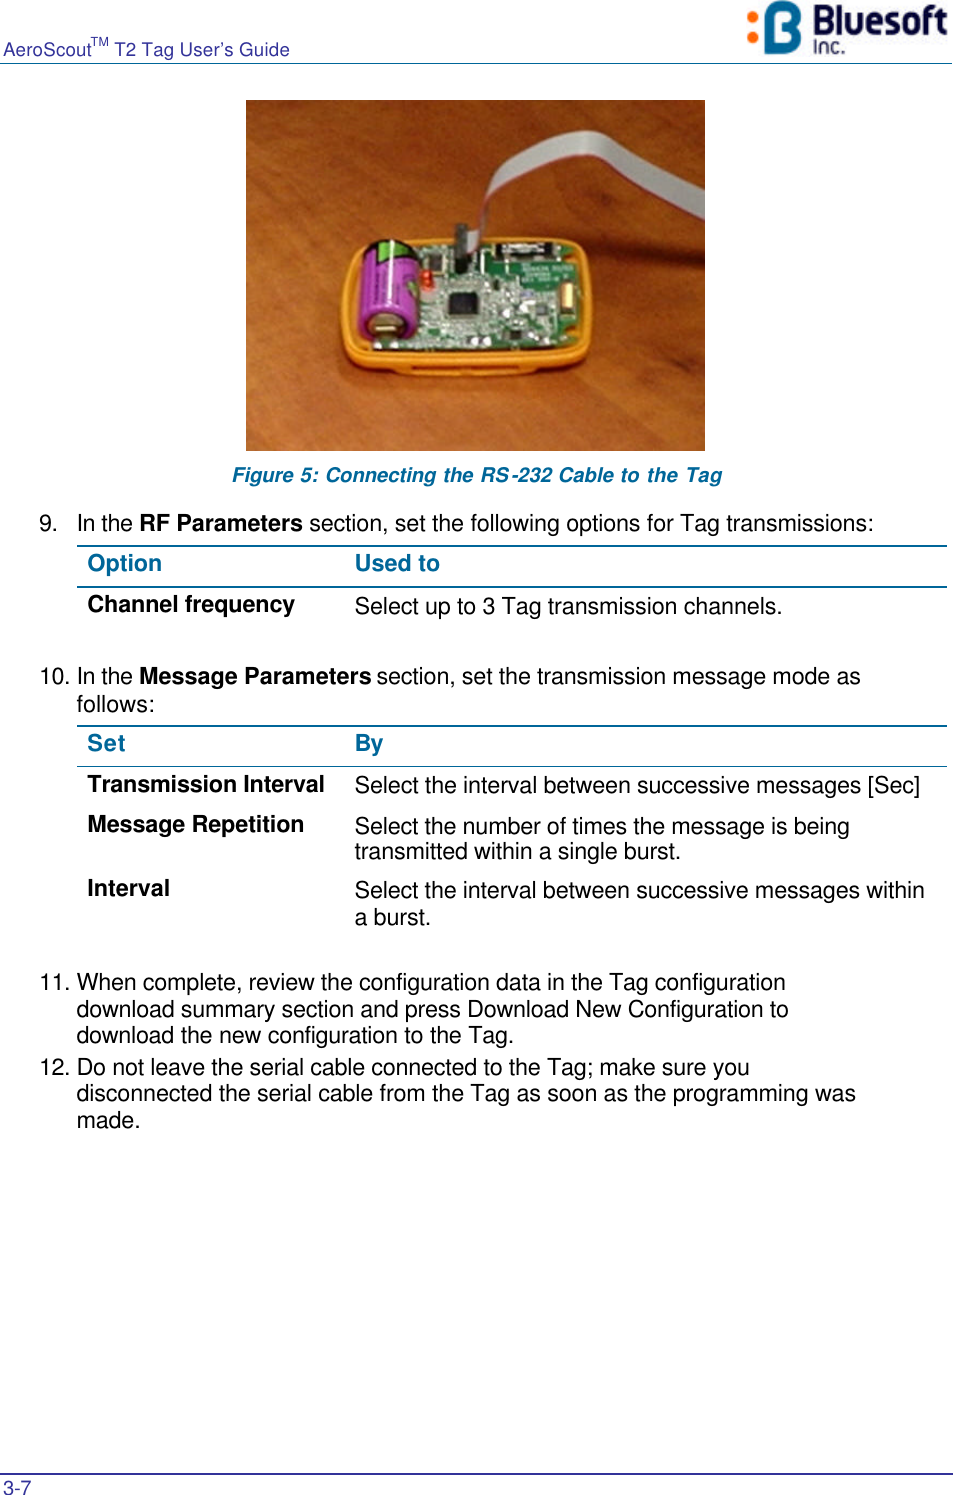 AeroScoutTM T2 Tag User’s Guide    3-7    Figure 5: Connecting the RS-232 Cable to the Tag 9. In the RF Parameters section, set the following options for Tag transmissions: Option  Used to Channel frequency Select up to 3 Tag transmission channels.  10. In the Message Parameters section, set the transmission message mode as follows: Set By  Transmission Interval Select the interval between successive messages [Sec] Message Repetition Select the number of times the message is being transmitted within a single burst. Interval Select the interval between successive messages within a burst.  11. When complete, review the configuration data in the Tag configuration download summary section and press Download New Configuration to download the new configuration to the Tag. 12. Do not leave the serial cable connected to the Tag; make sure you disconnected the serial cable from the Tag as soon as the programming was made.    